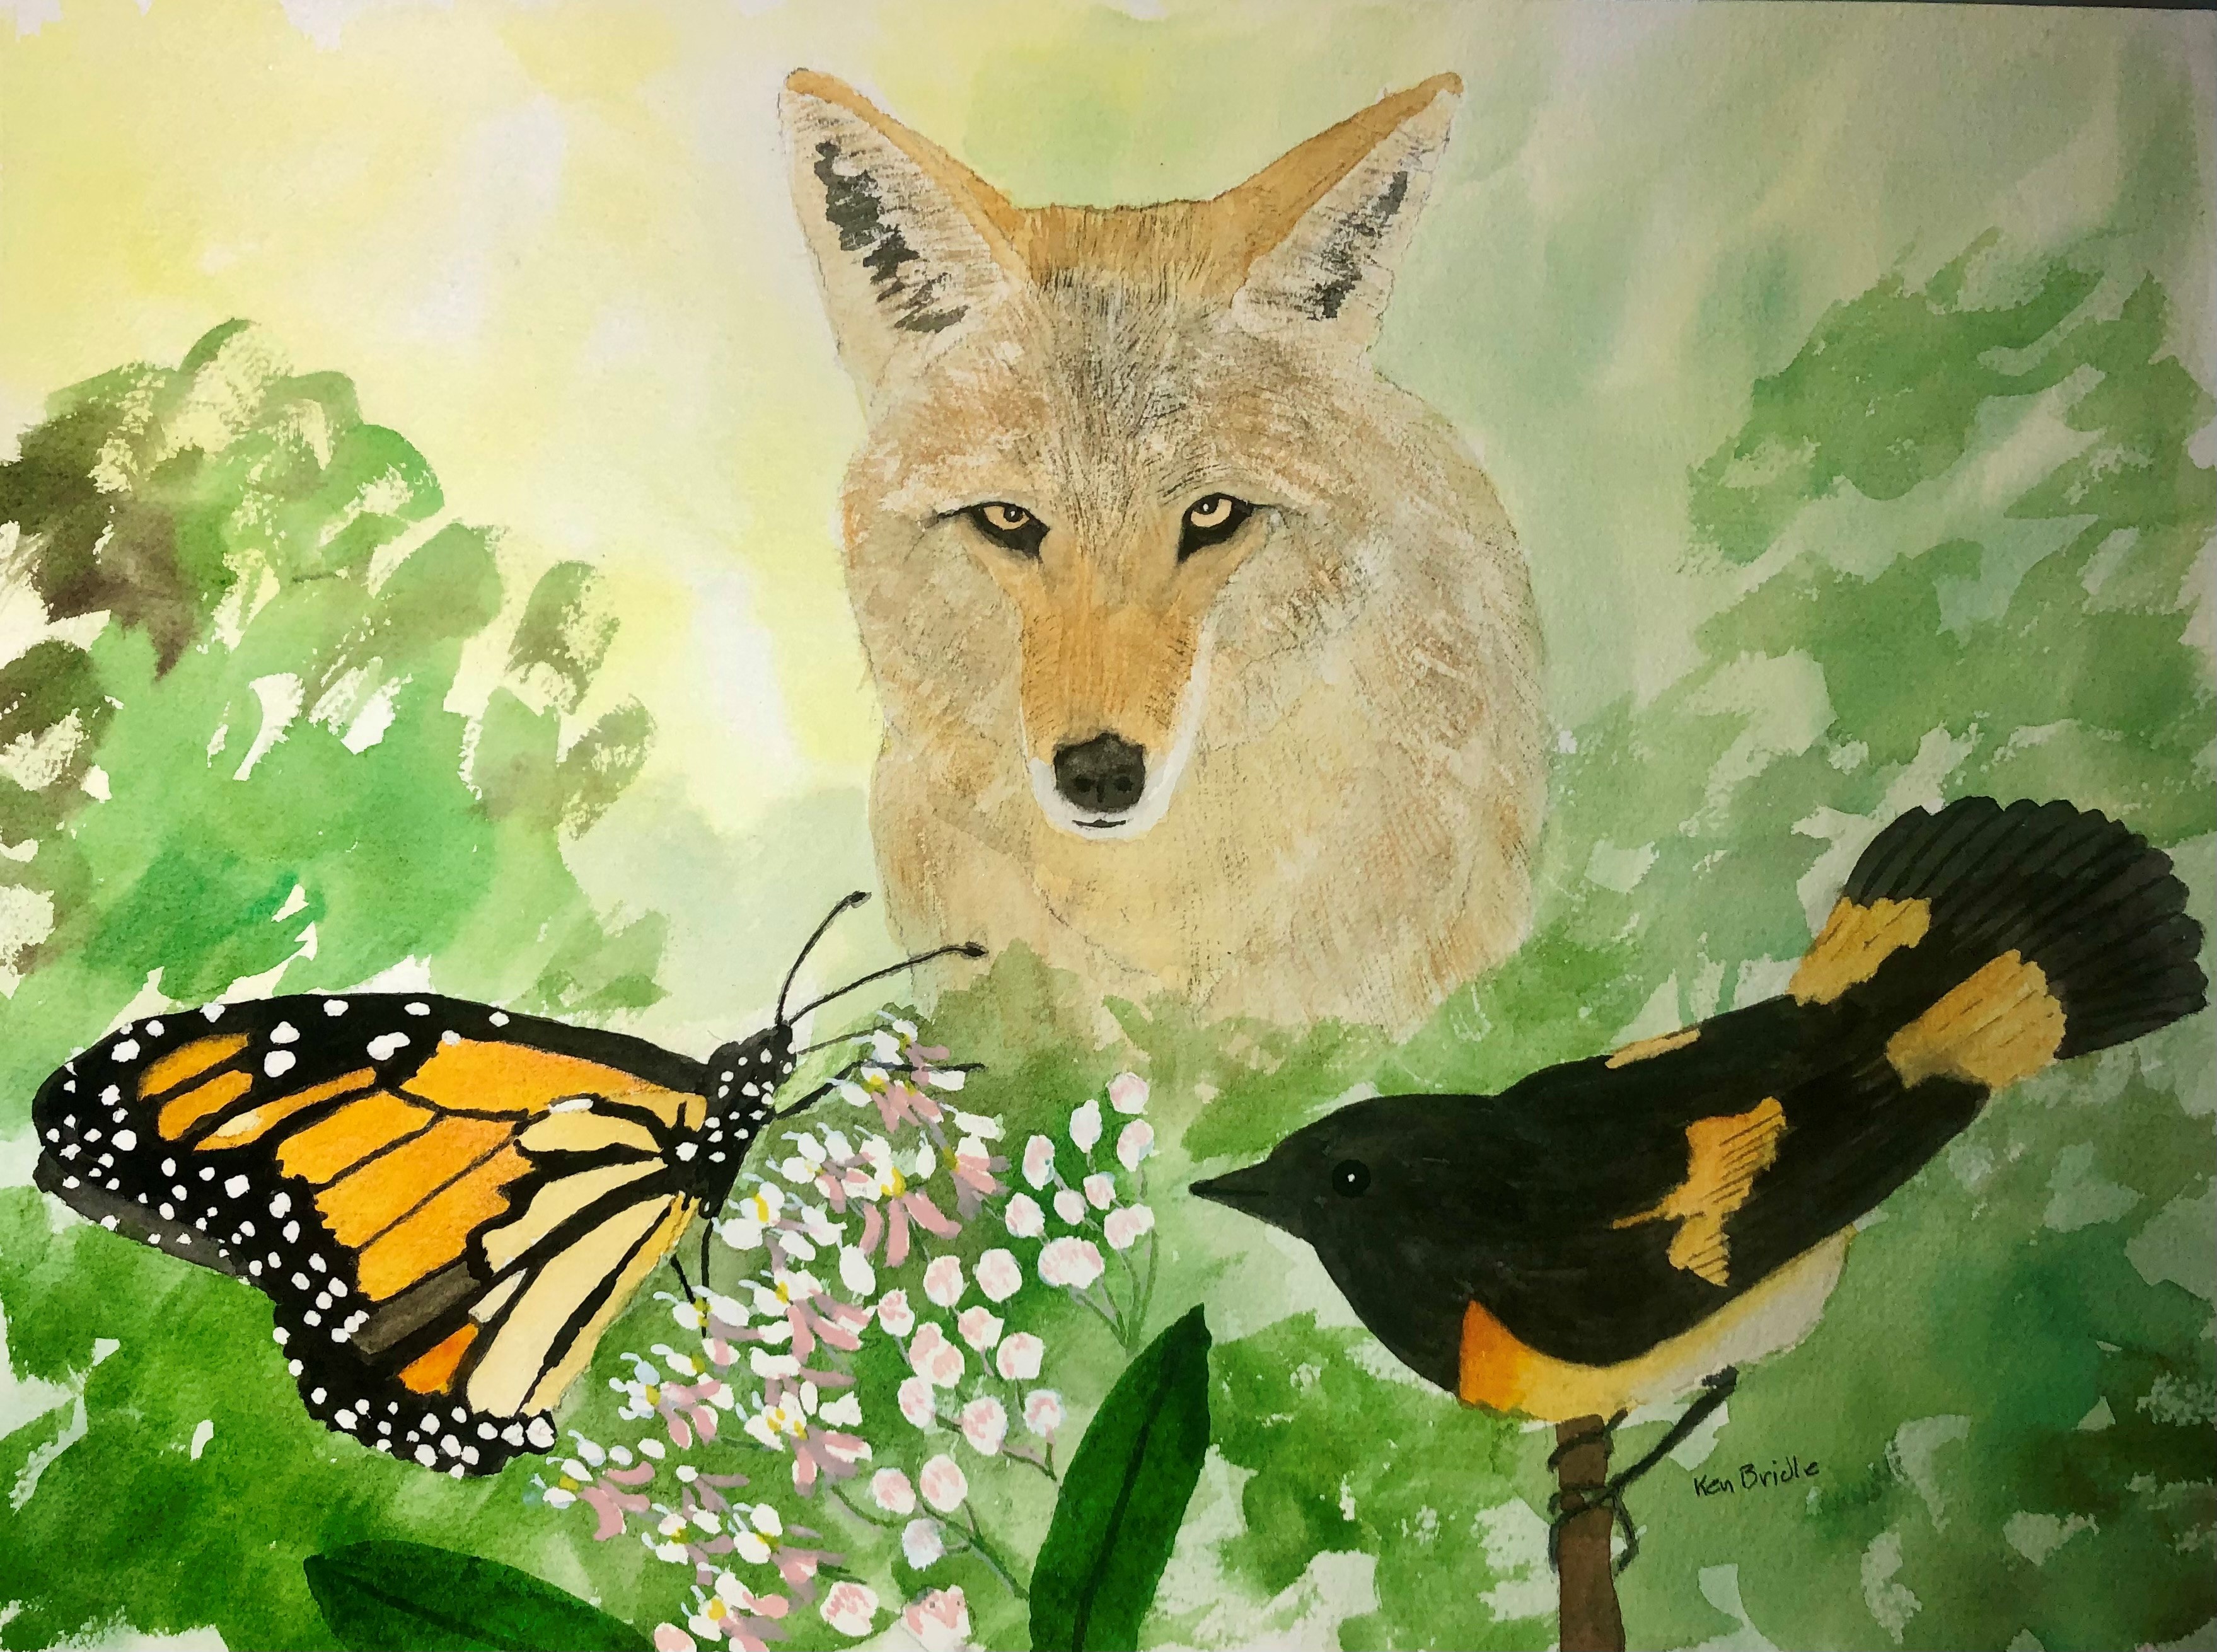 Monarch butterfly, coyote, bird painting by Ken Bridle